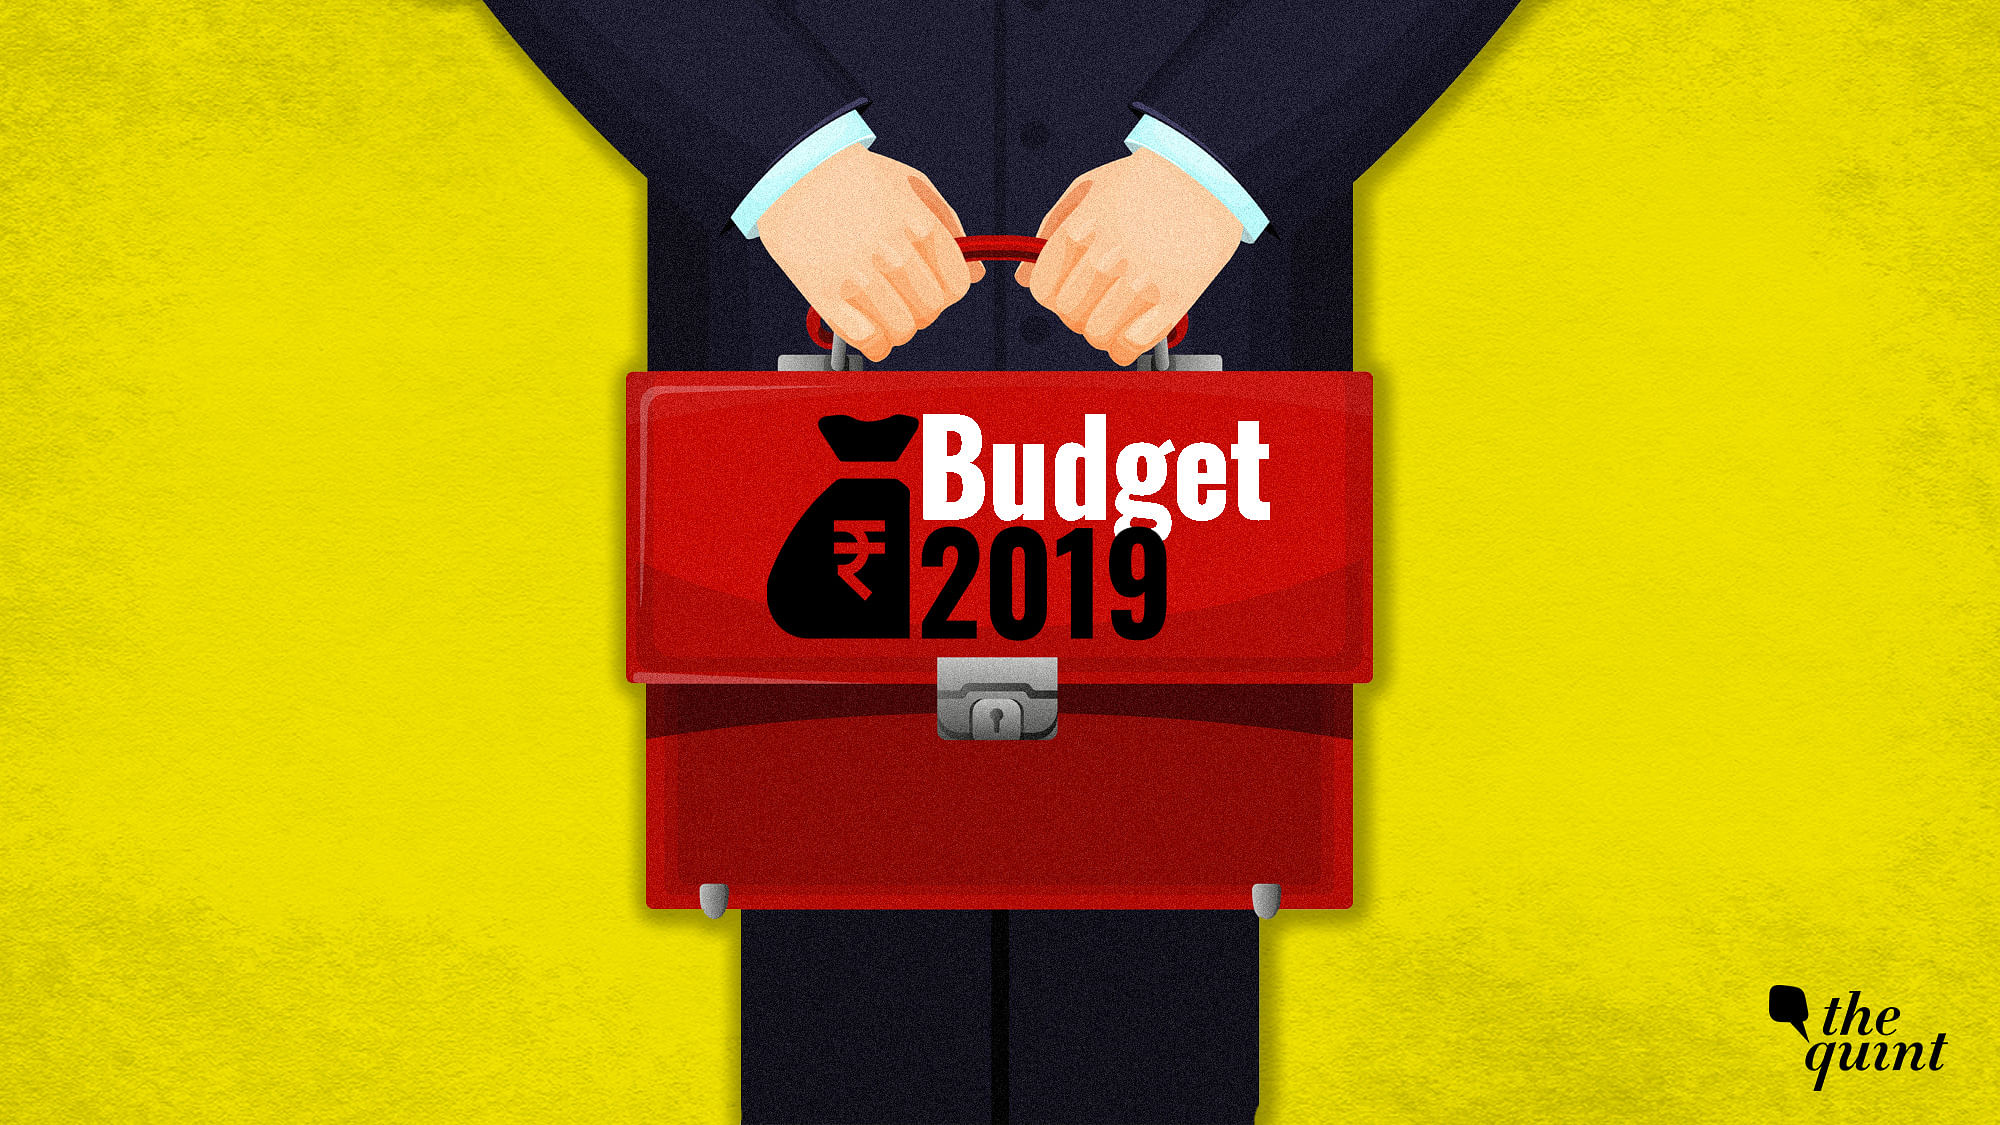 Budget 2019 Speech Live on Lok Sabha and DD News: Where to watch the Live Streaming of Union Budget 2019.